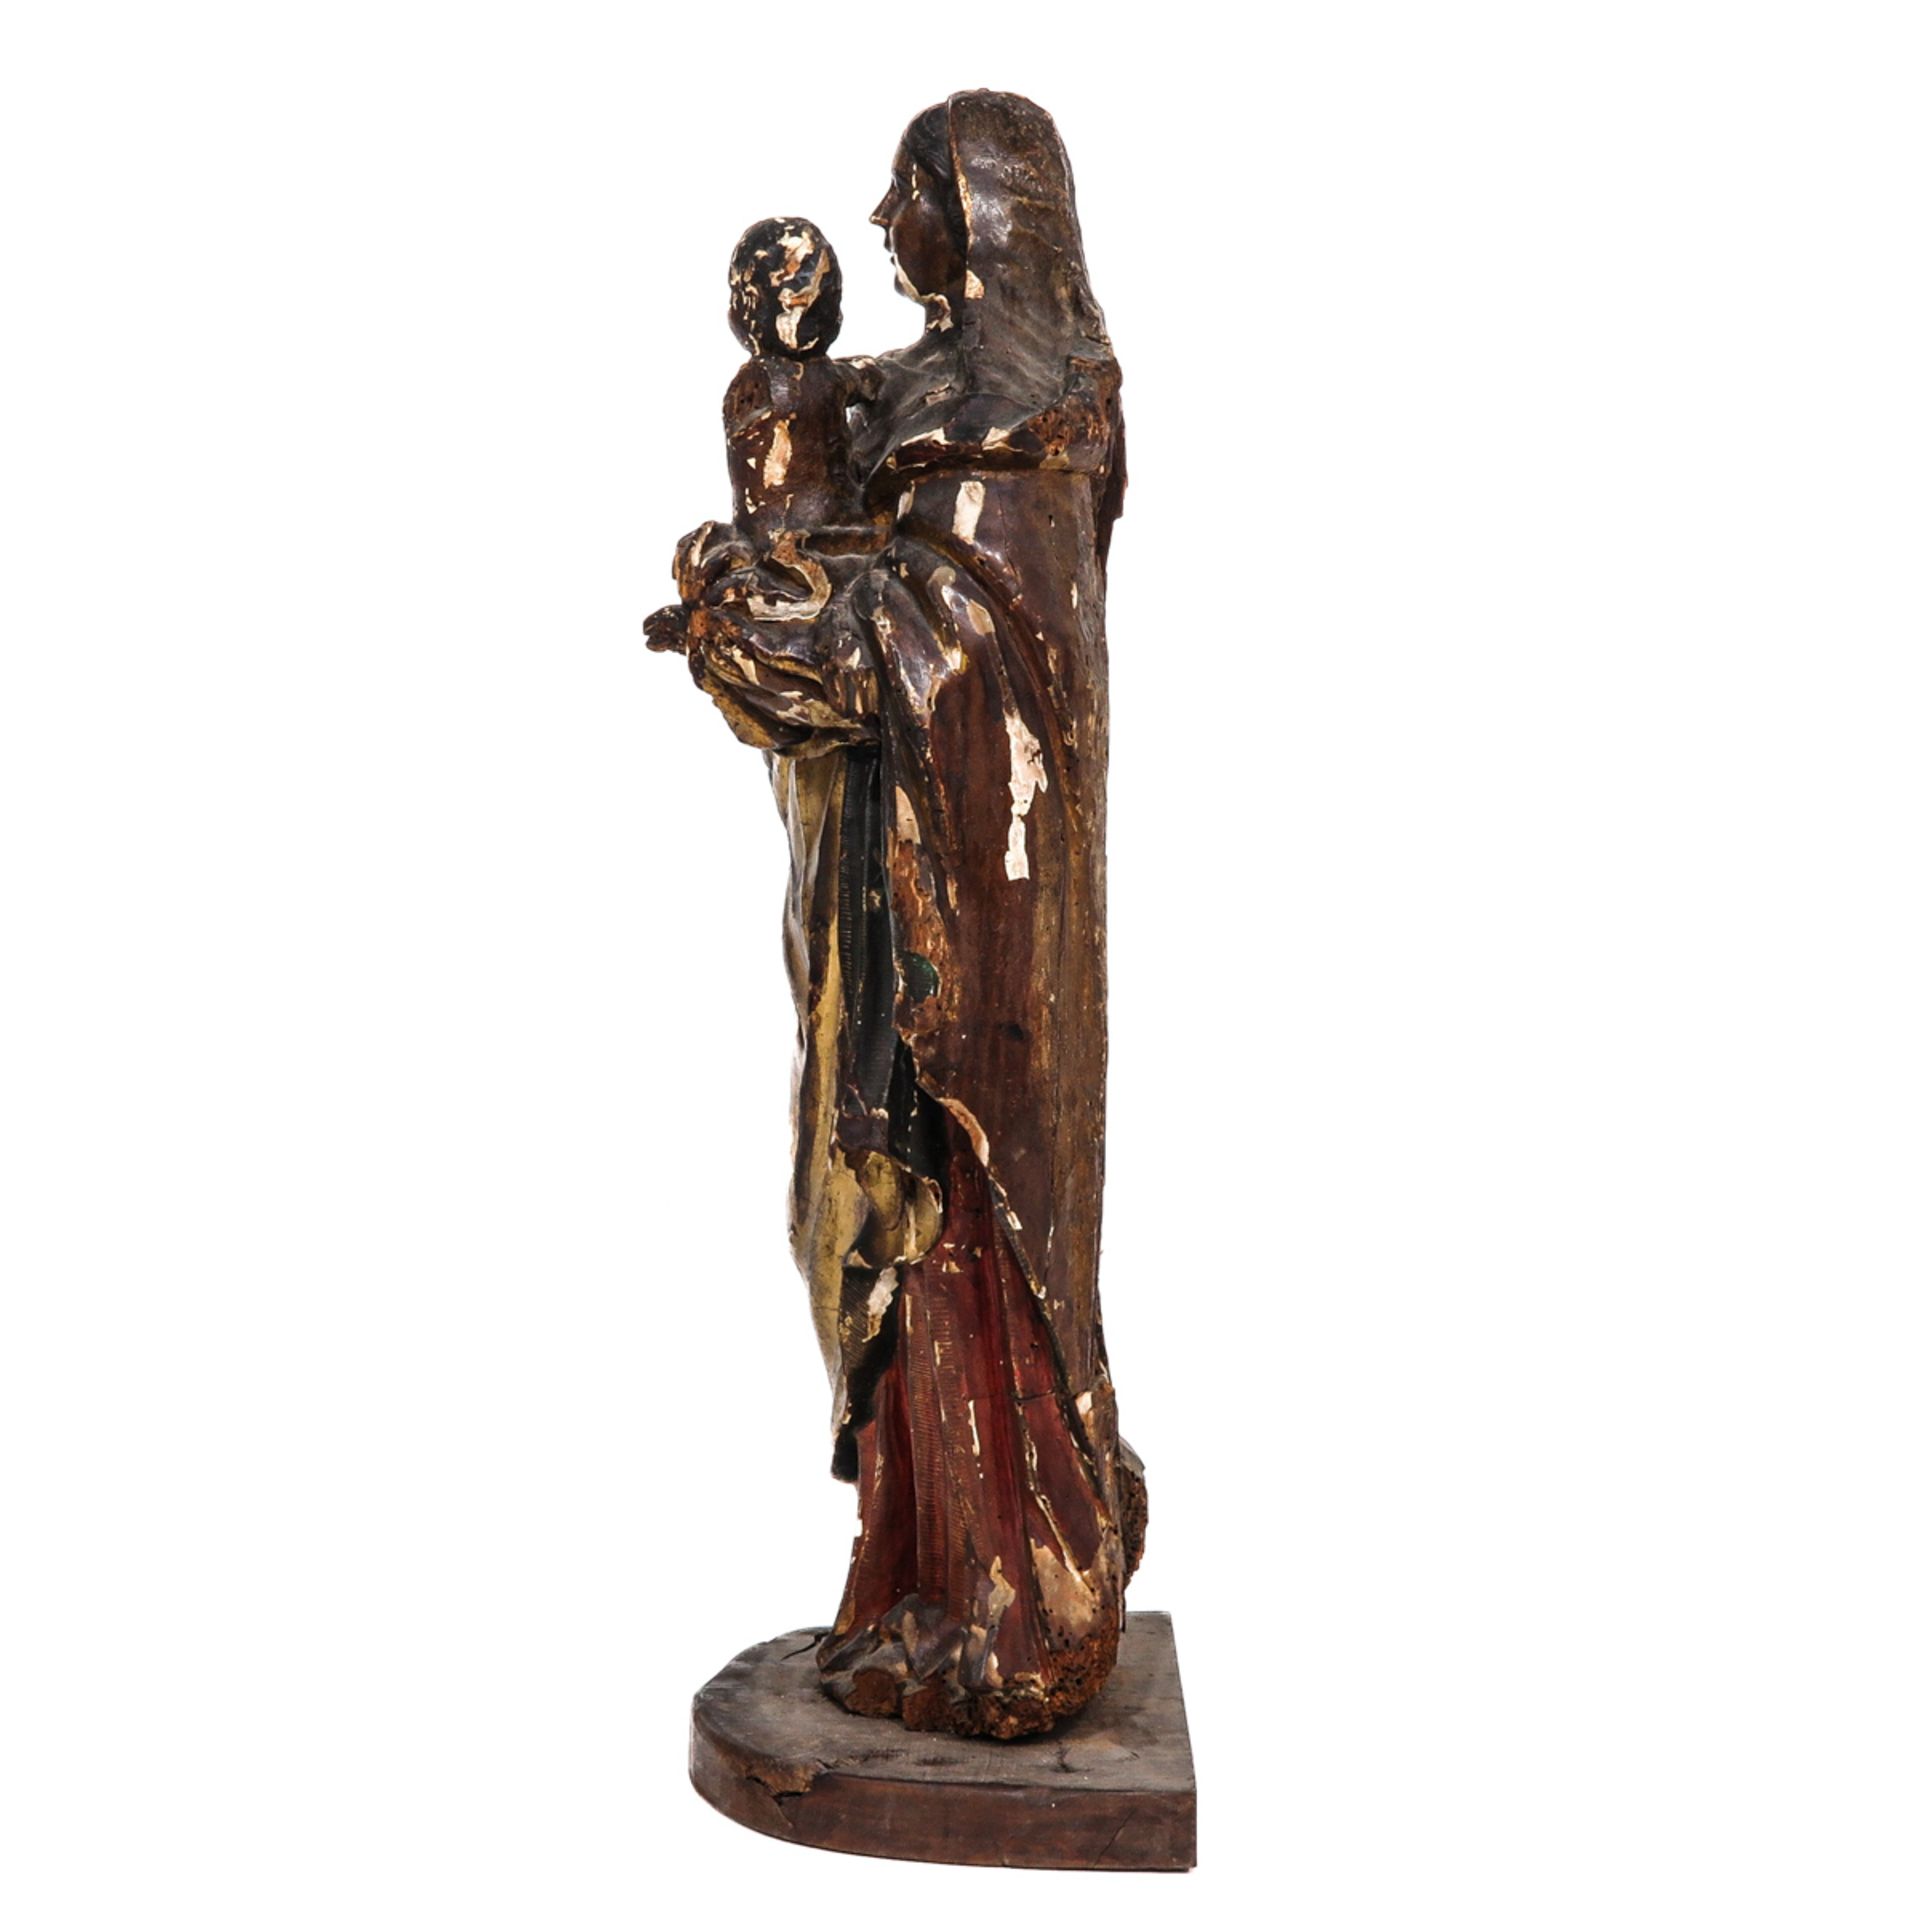 A Wood Sculpture of the Black Madonna - Image 2 of 10